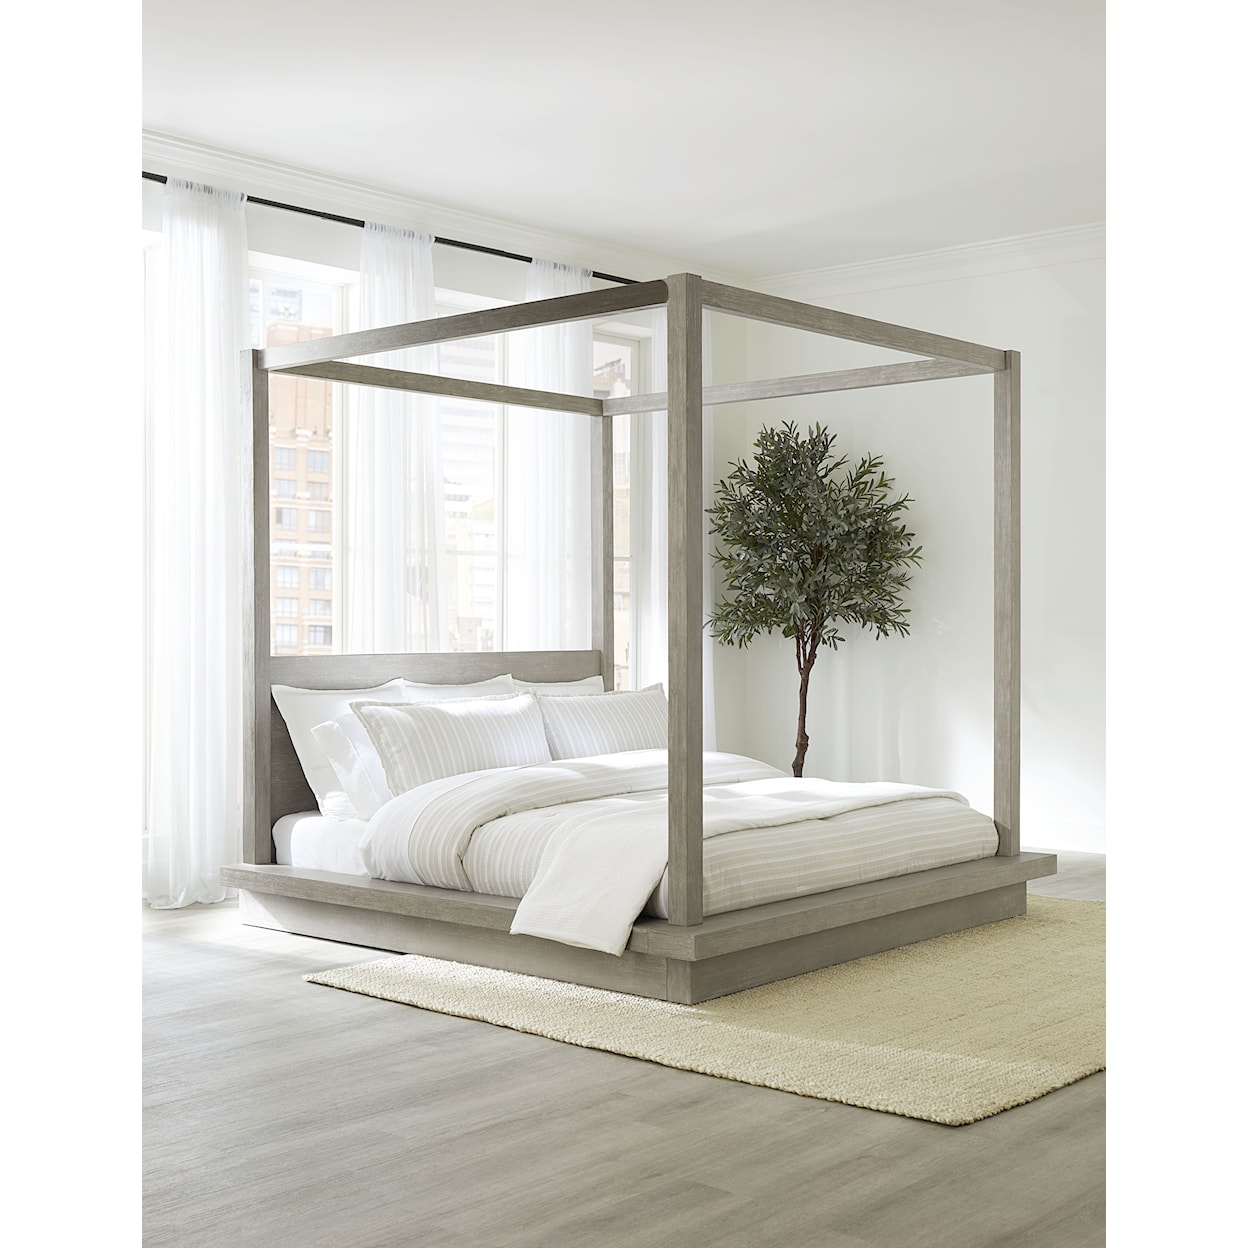 Modus International Melbourne King Wood Canopy Bed